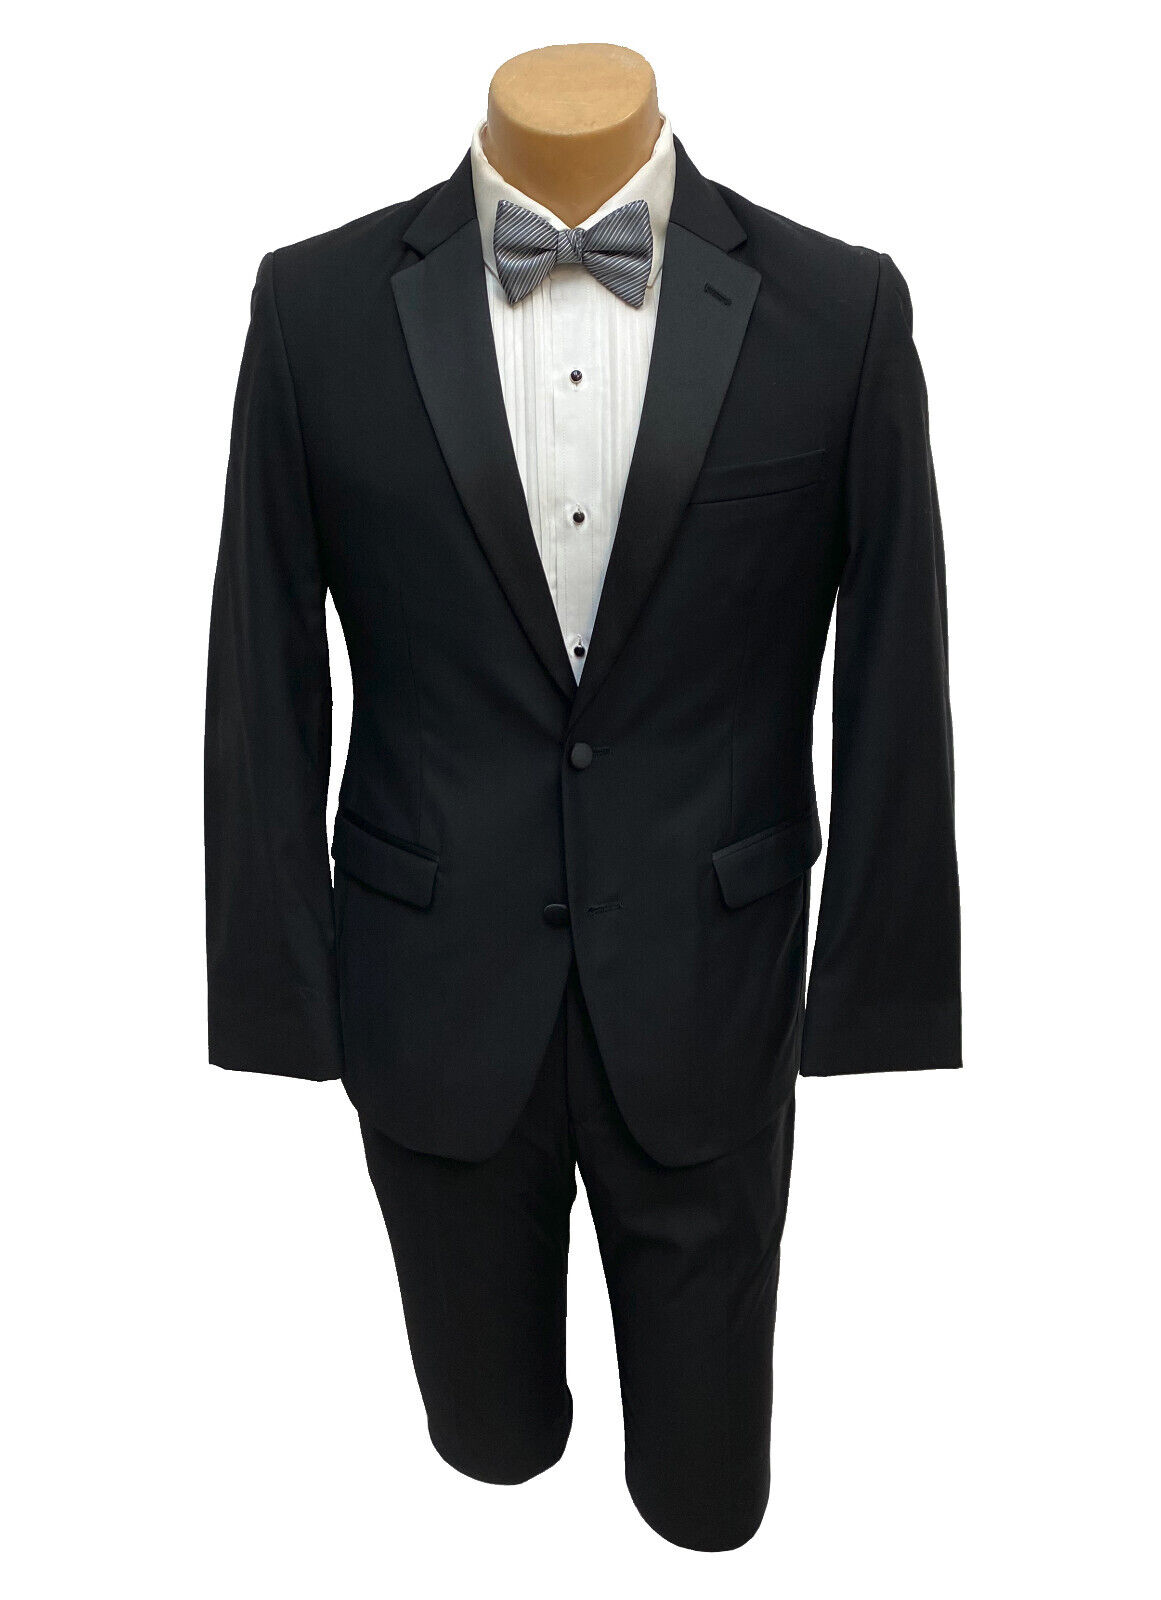 Men's Black Tuxedo with Flat Front Pants High Quality Merino Wool Modern Fit